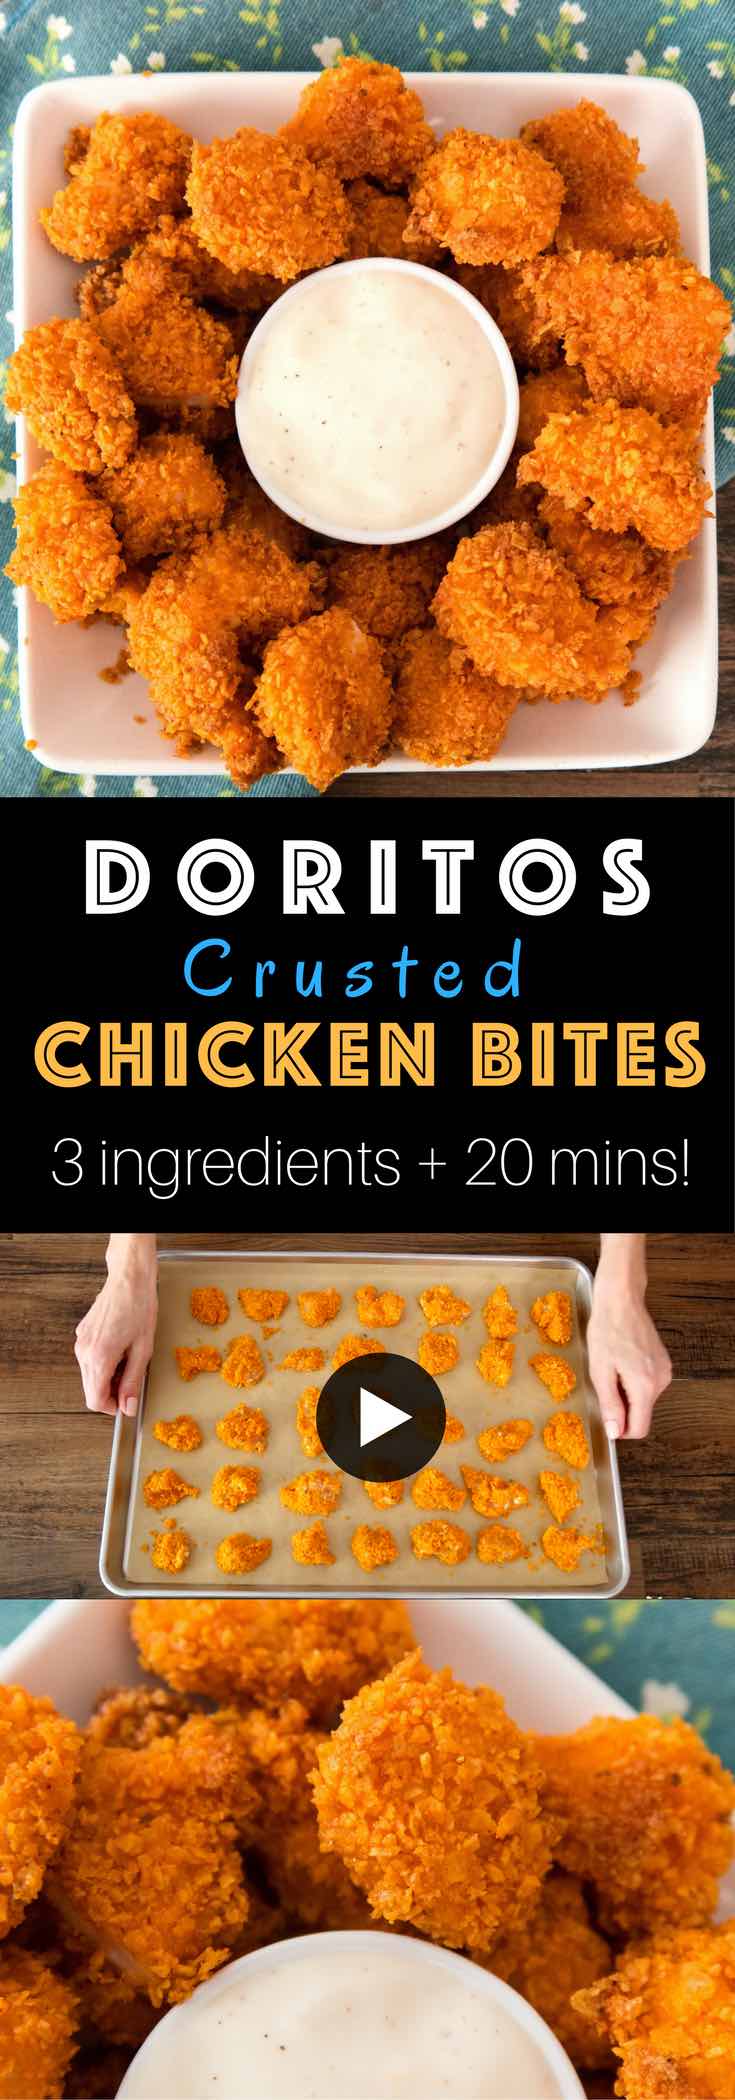 Doritos Chicken Bites - a delicious baked appetizer that's easy to make with just 3 ingredients in about 20 minutes. Crispy on the outside and tender inside, they're perfect as an appetizer for a party or Game Day, or just an everyday snack! #doritochicken #popcornchicken 